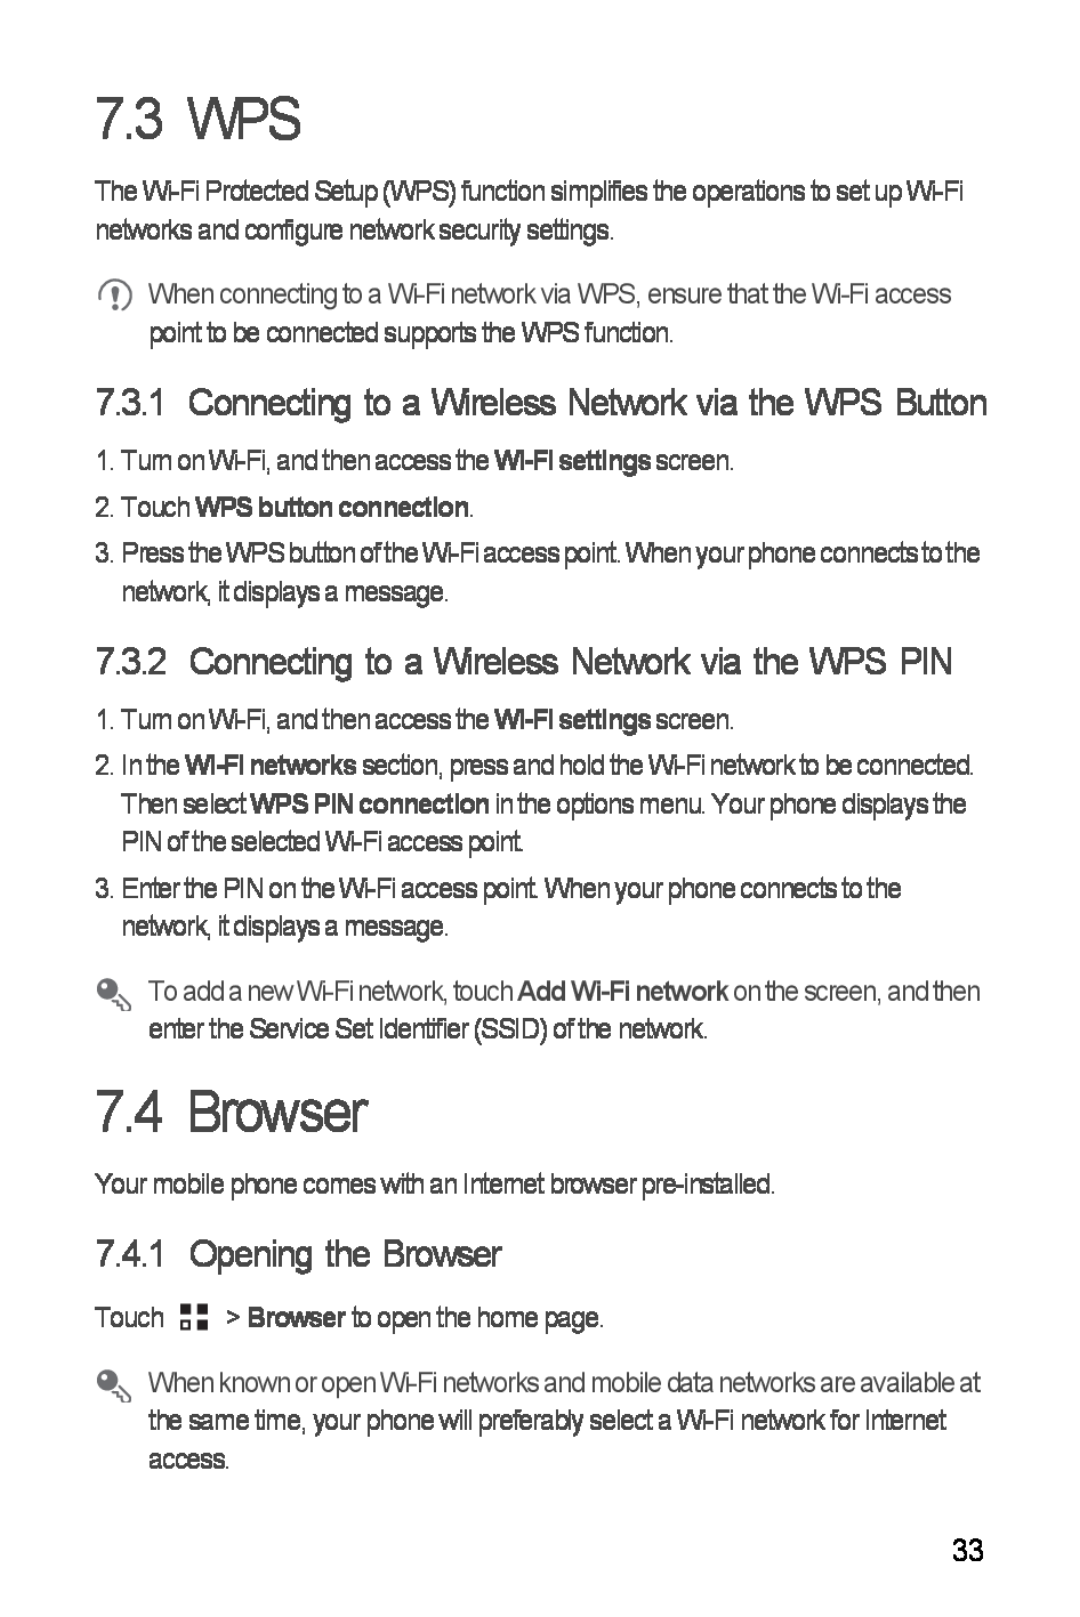 Huawei Ascend Y manual 7.3 WPS, Connecting to a Wireless Network via the WPS PIN, Opening the Browser 